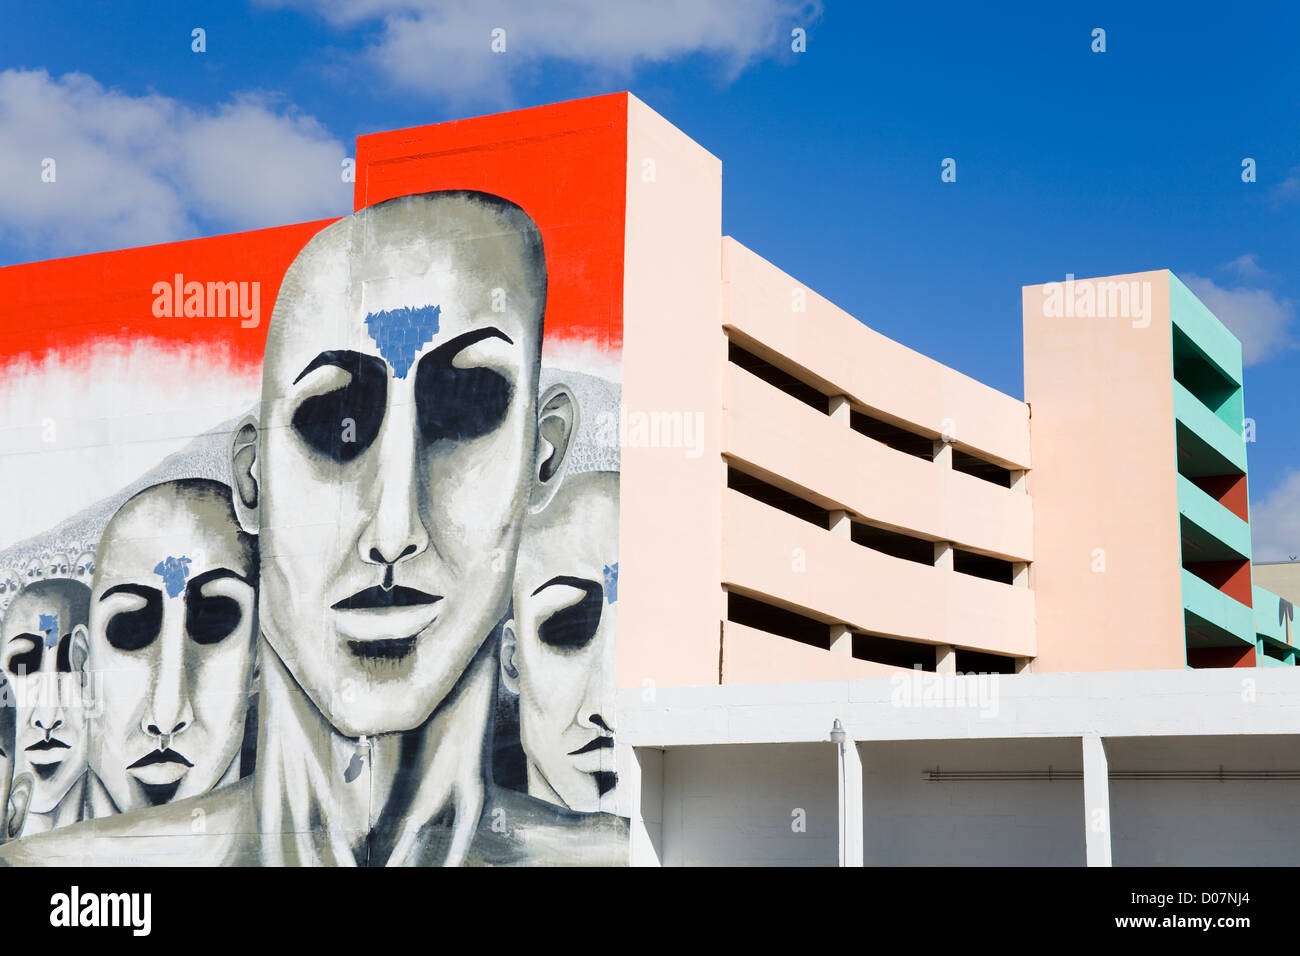 Mural by Subi in downtown Miami,Florida,USA Stock Photo